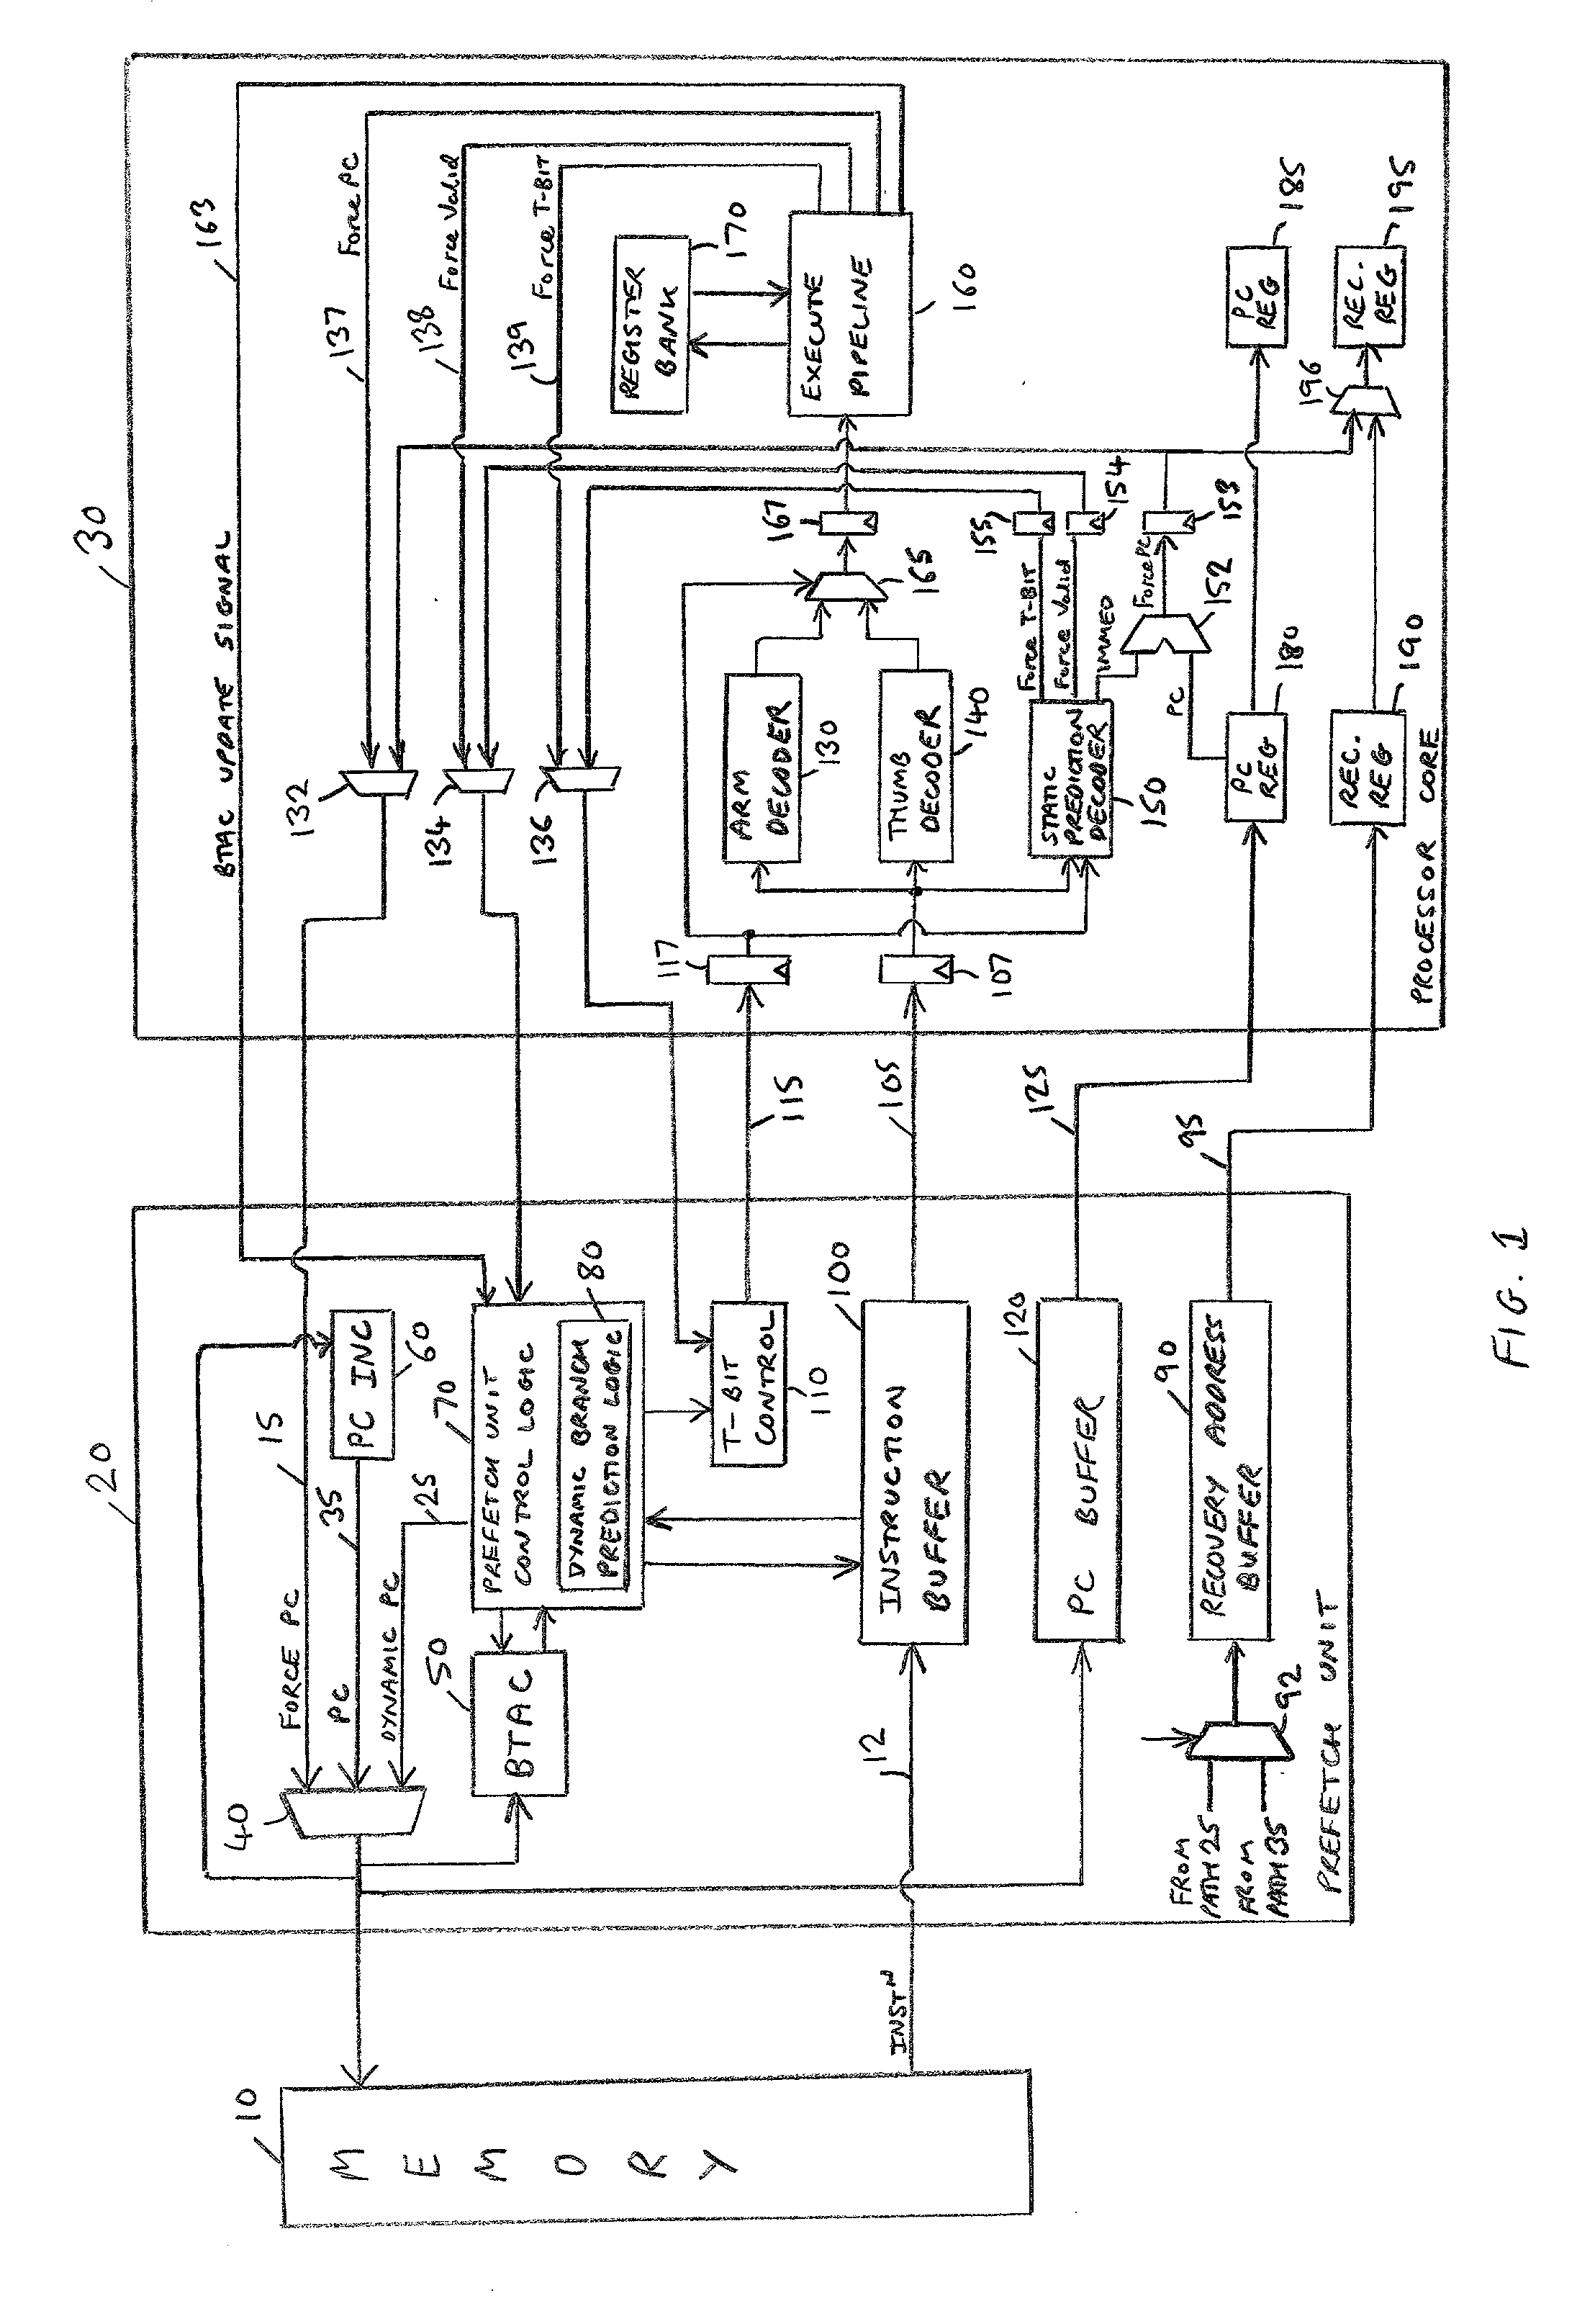 Prediction of branch instructions in a data processing apparatus